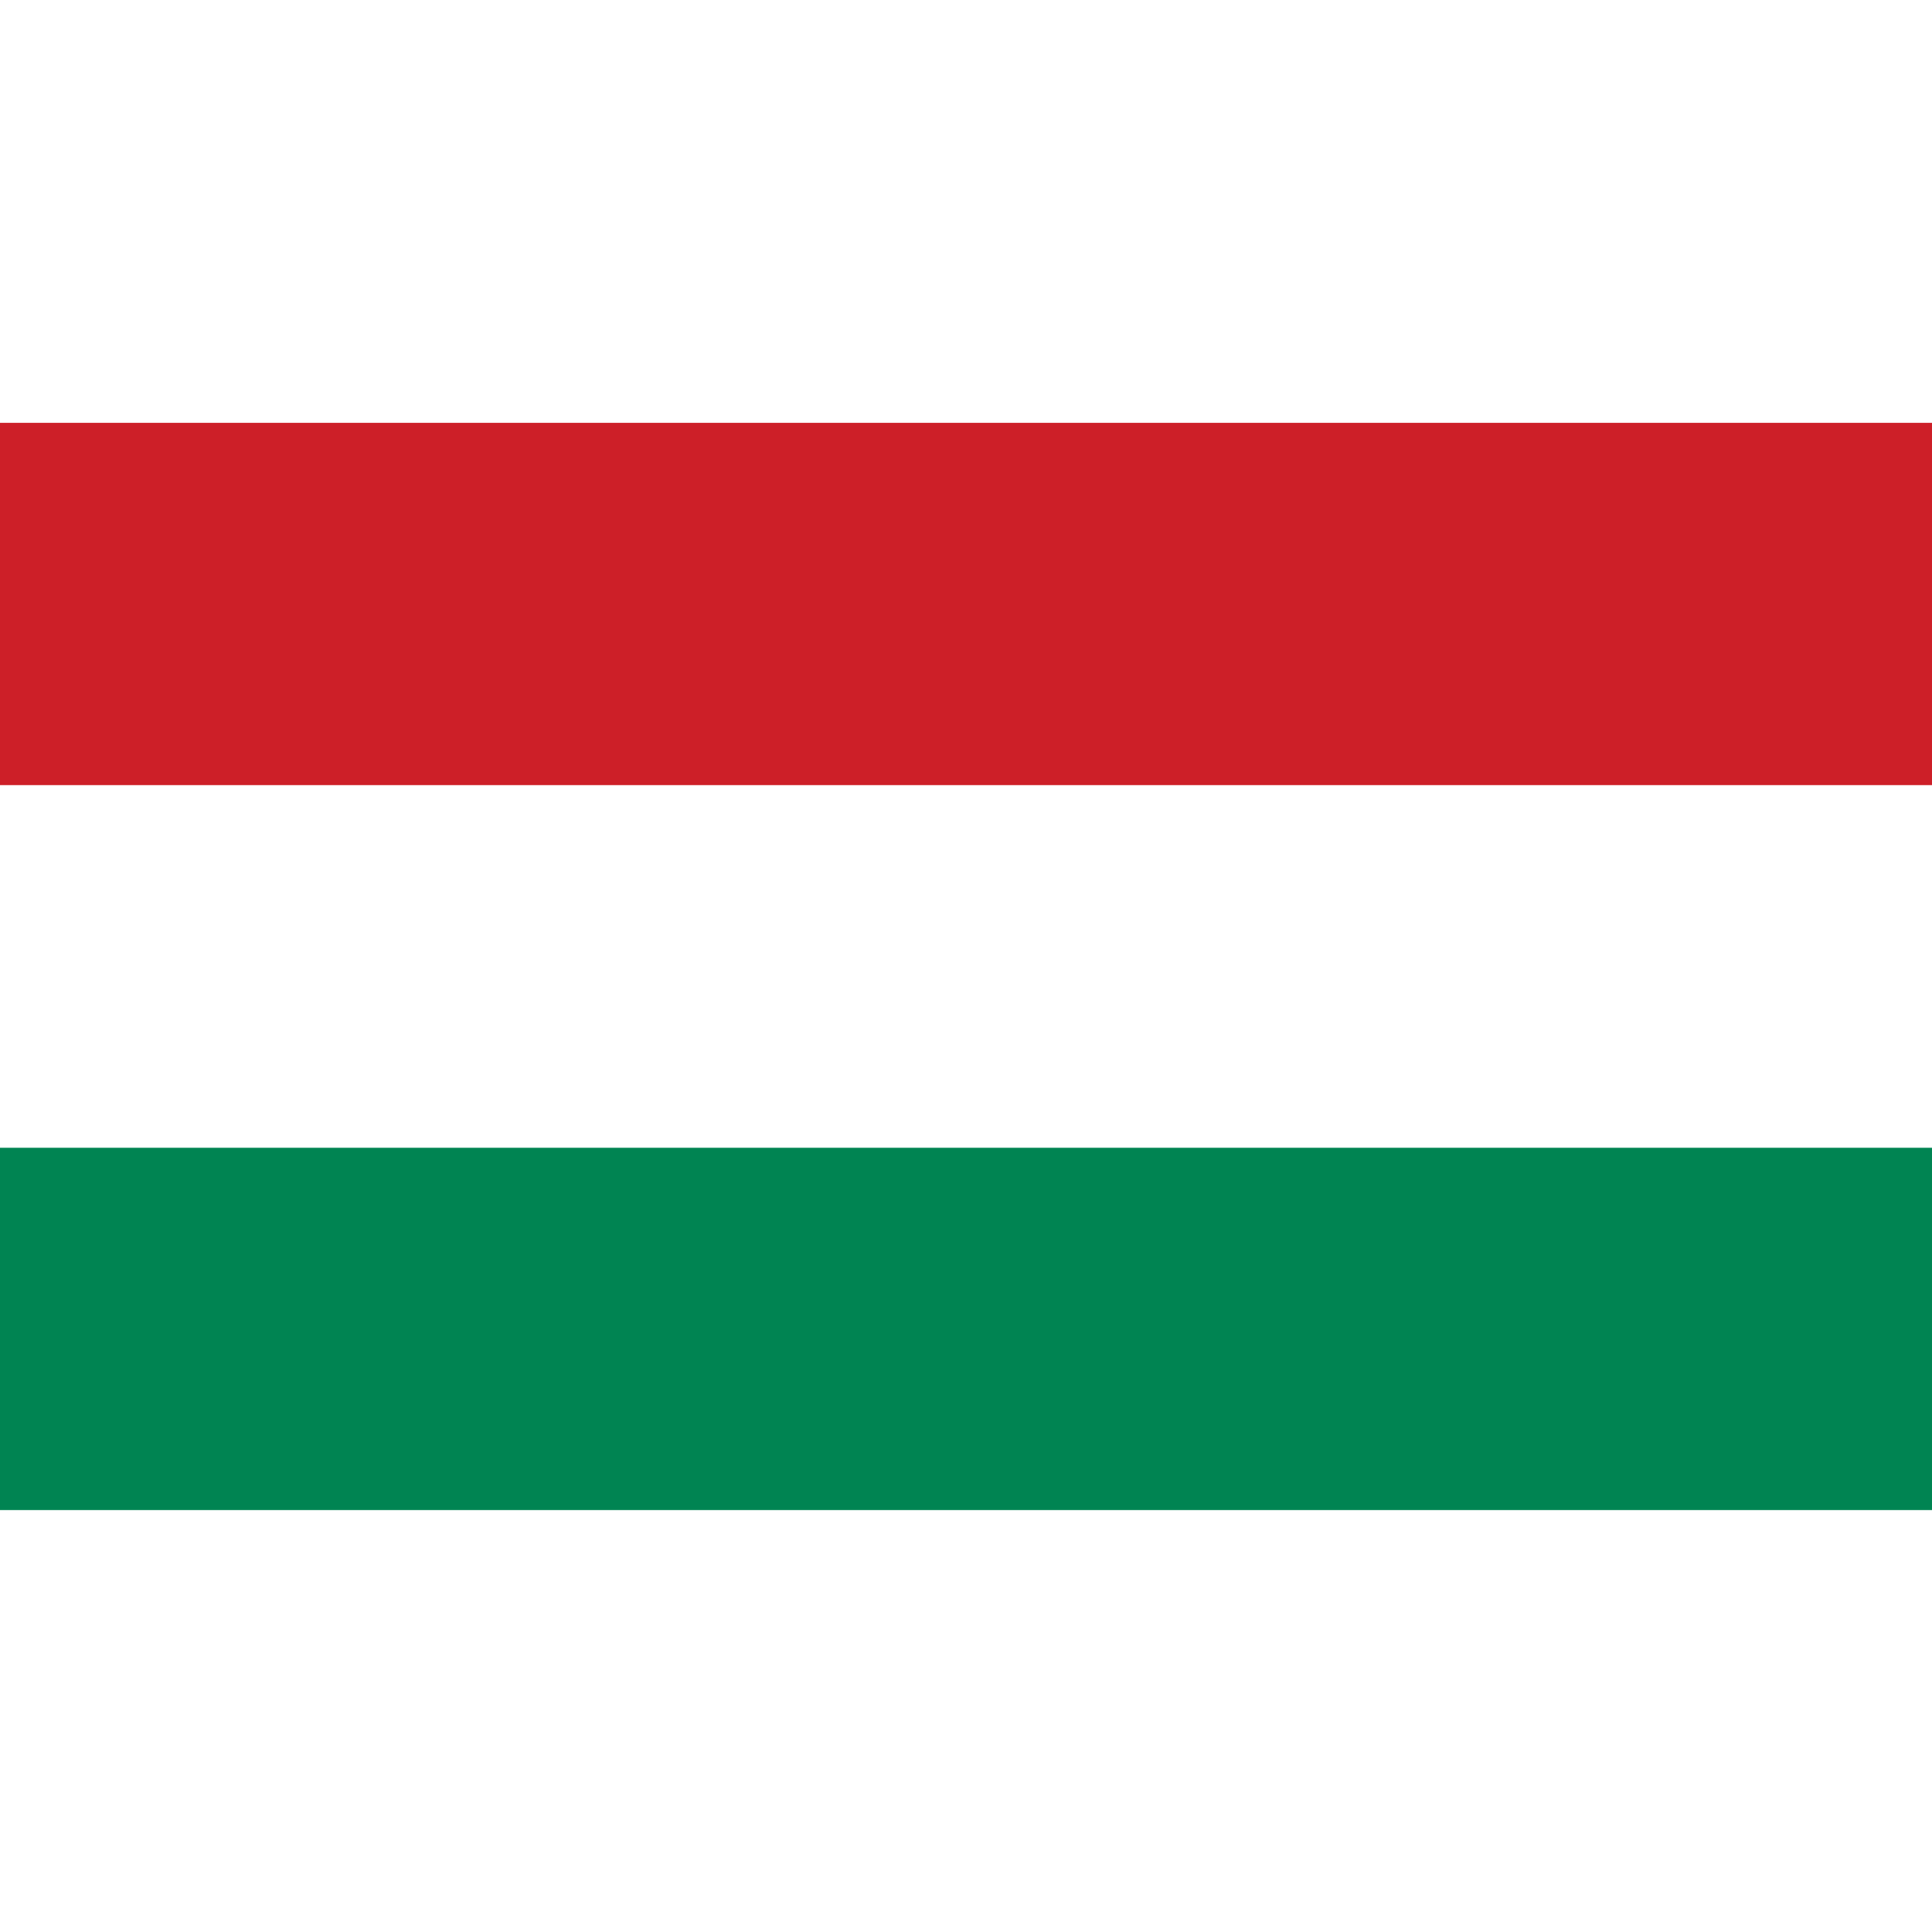 The flag of Hungary is a horizontal tricolour of 3 red, white and green bands.